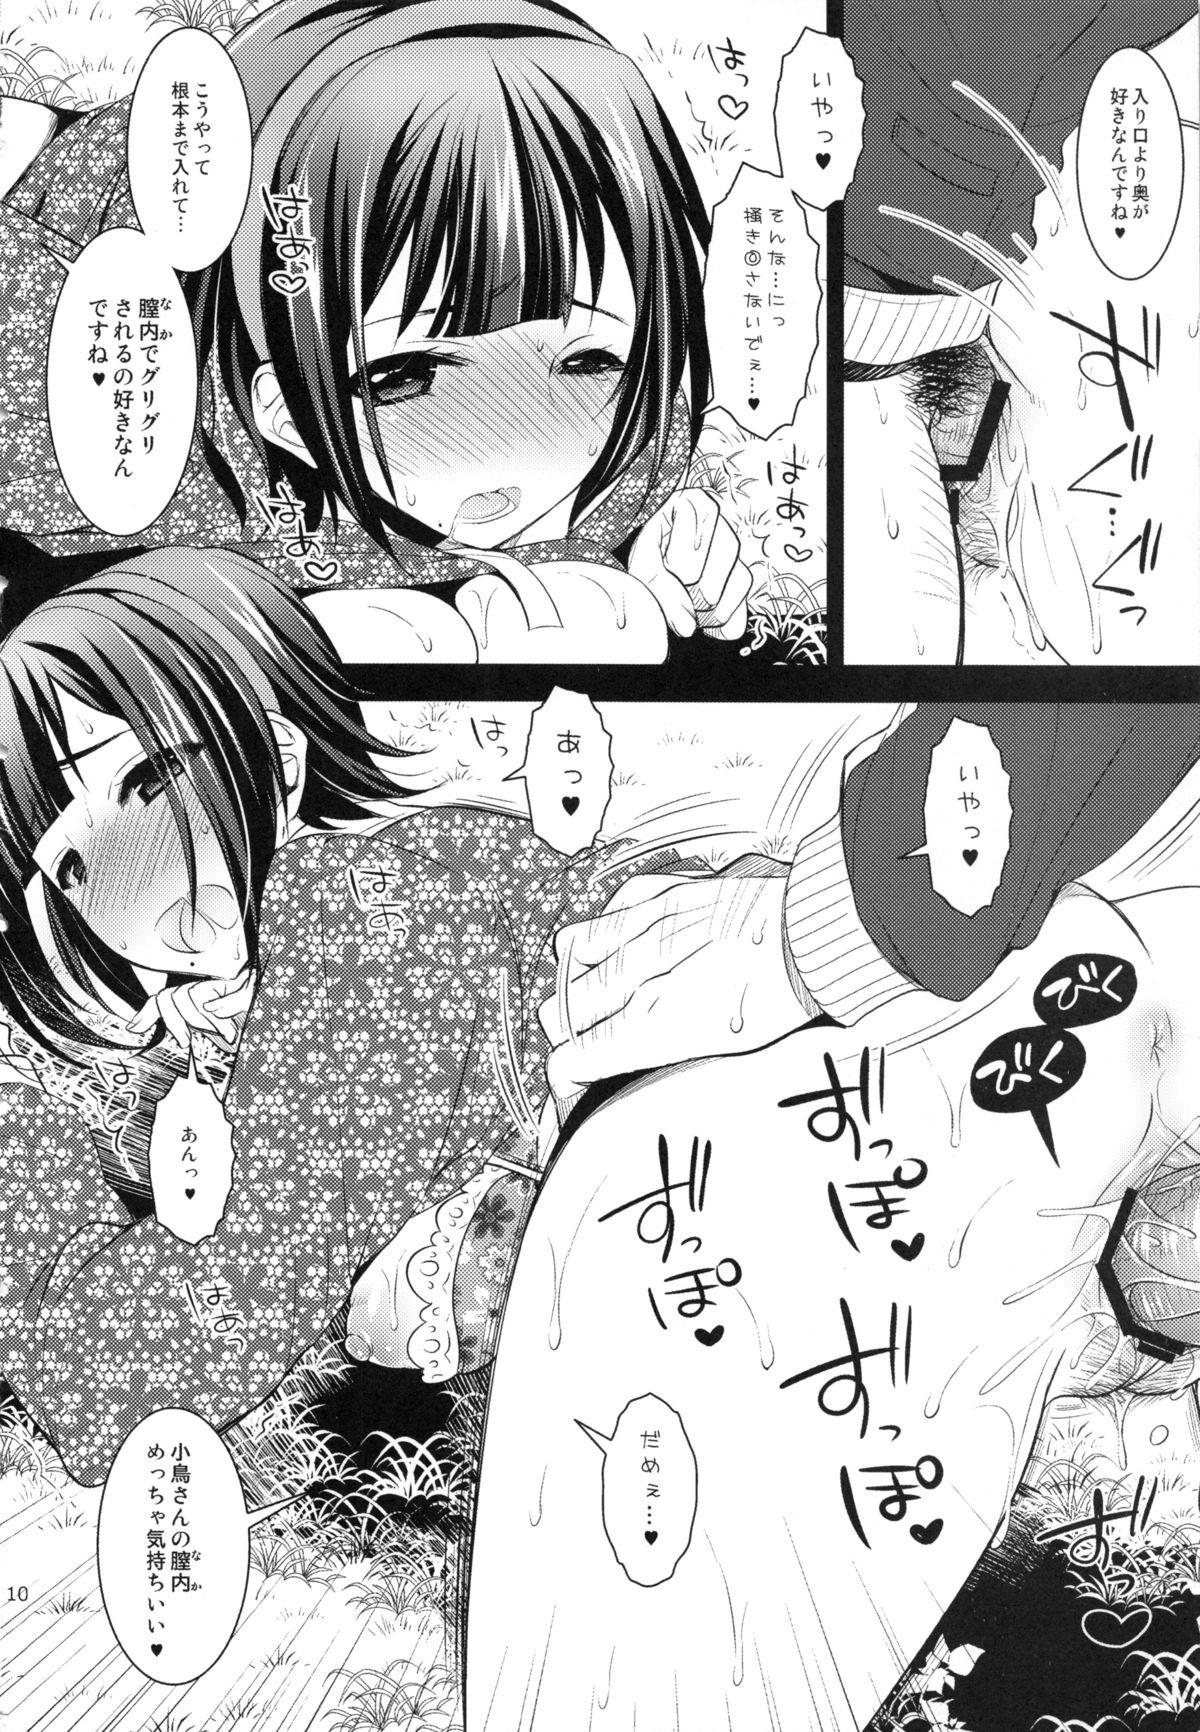 T Girl Suck of Life - The idolmaster Handjobs - Page 9